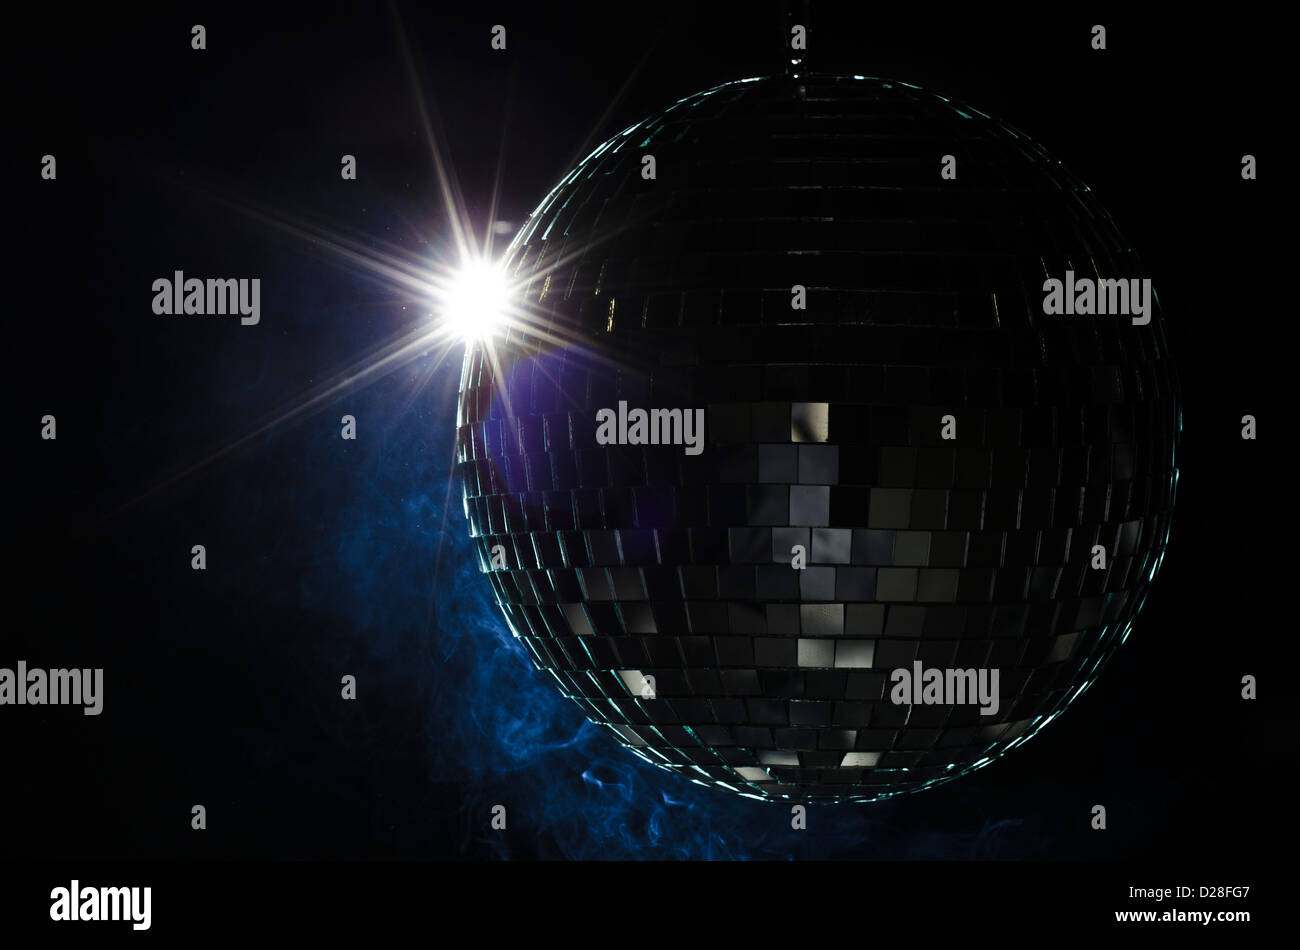 A disco ball with light flare and smoke. A nightlife image to be used as example on party fliers. Stock Photo